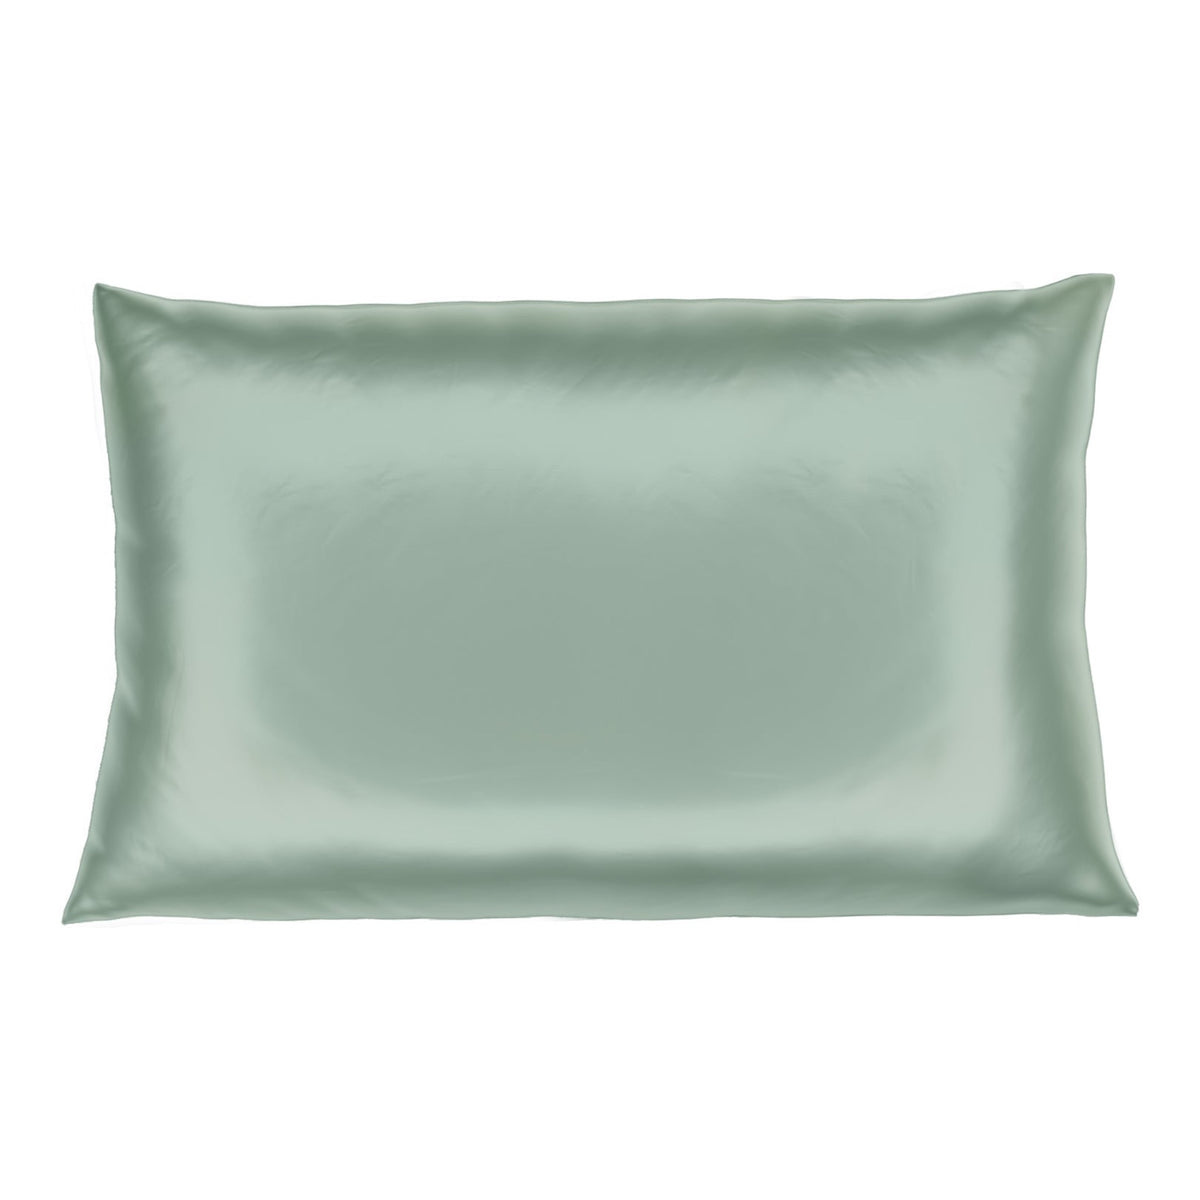 Mulberry Park Silks Deluxe 19 Momme Pure Silk Pillowcase in Green Color